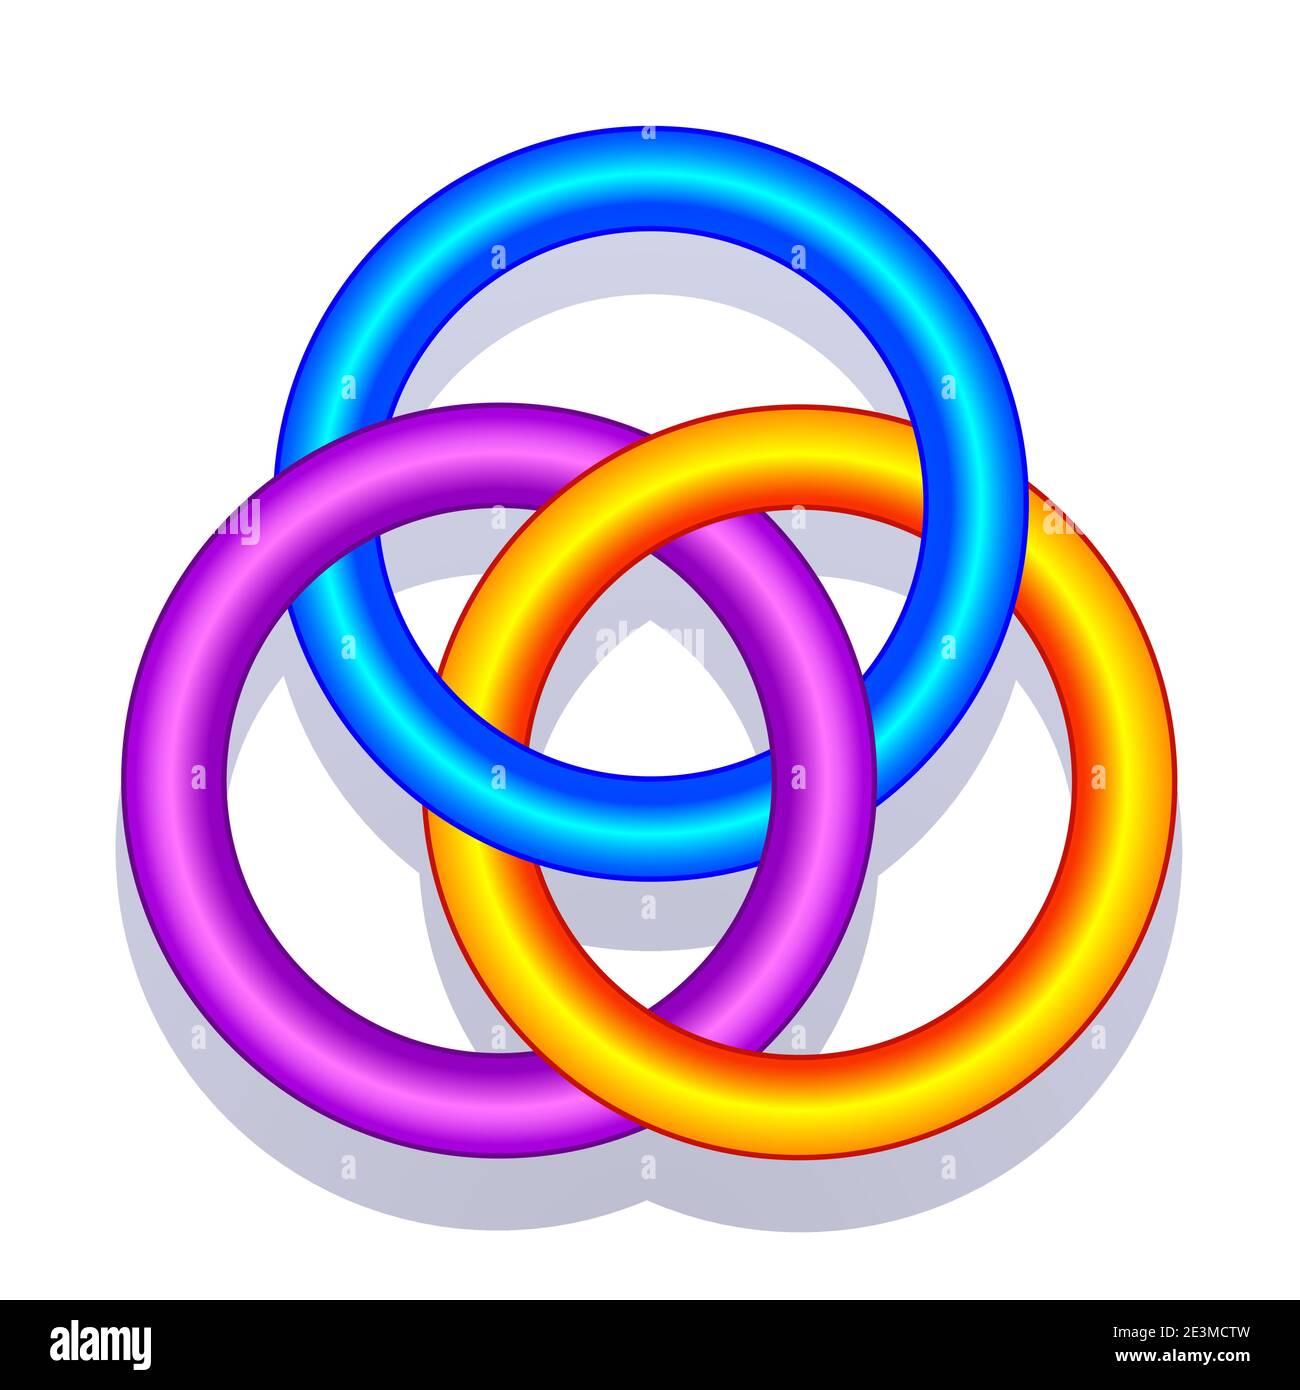 Illustration of impossible linked color circles, also known as Borromean rings Stock Vector